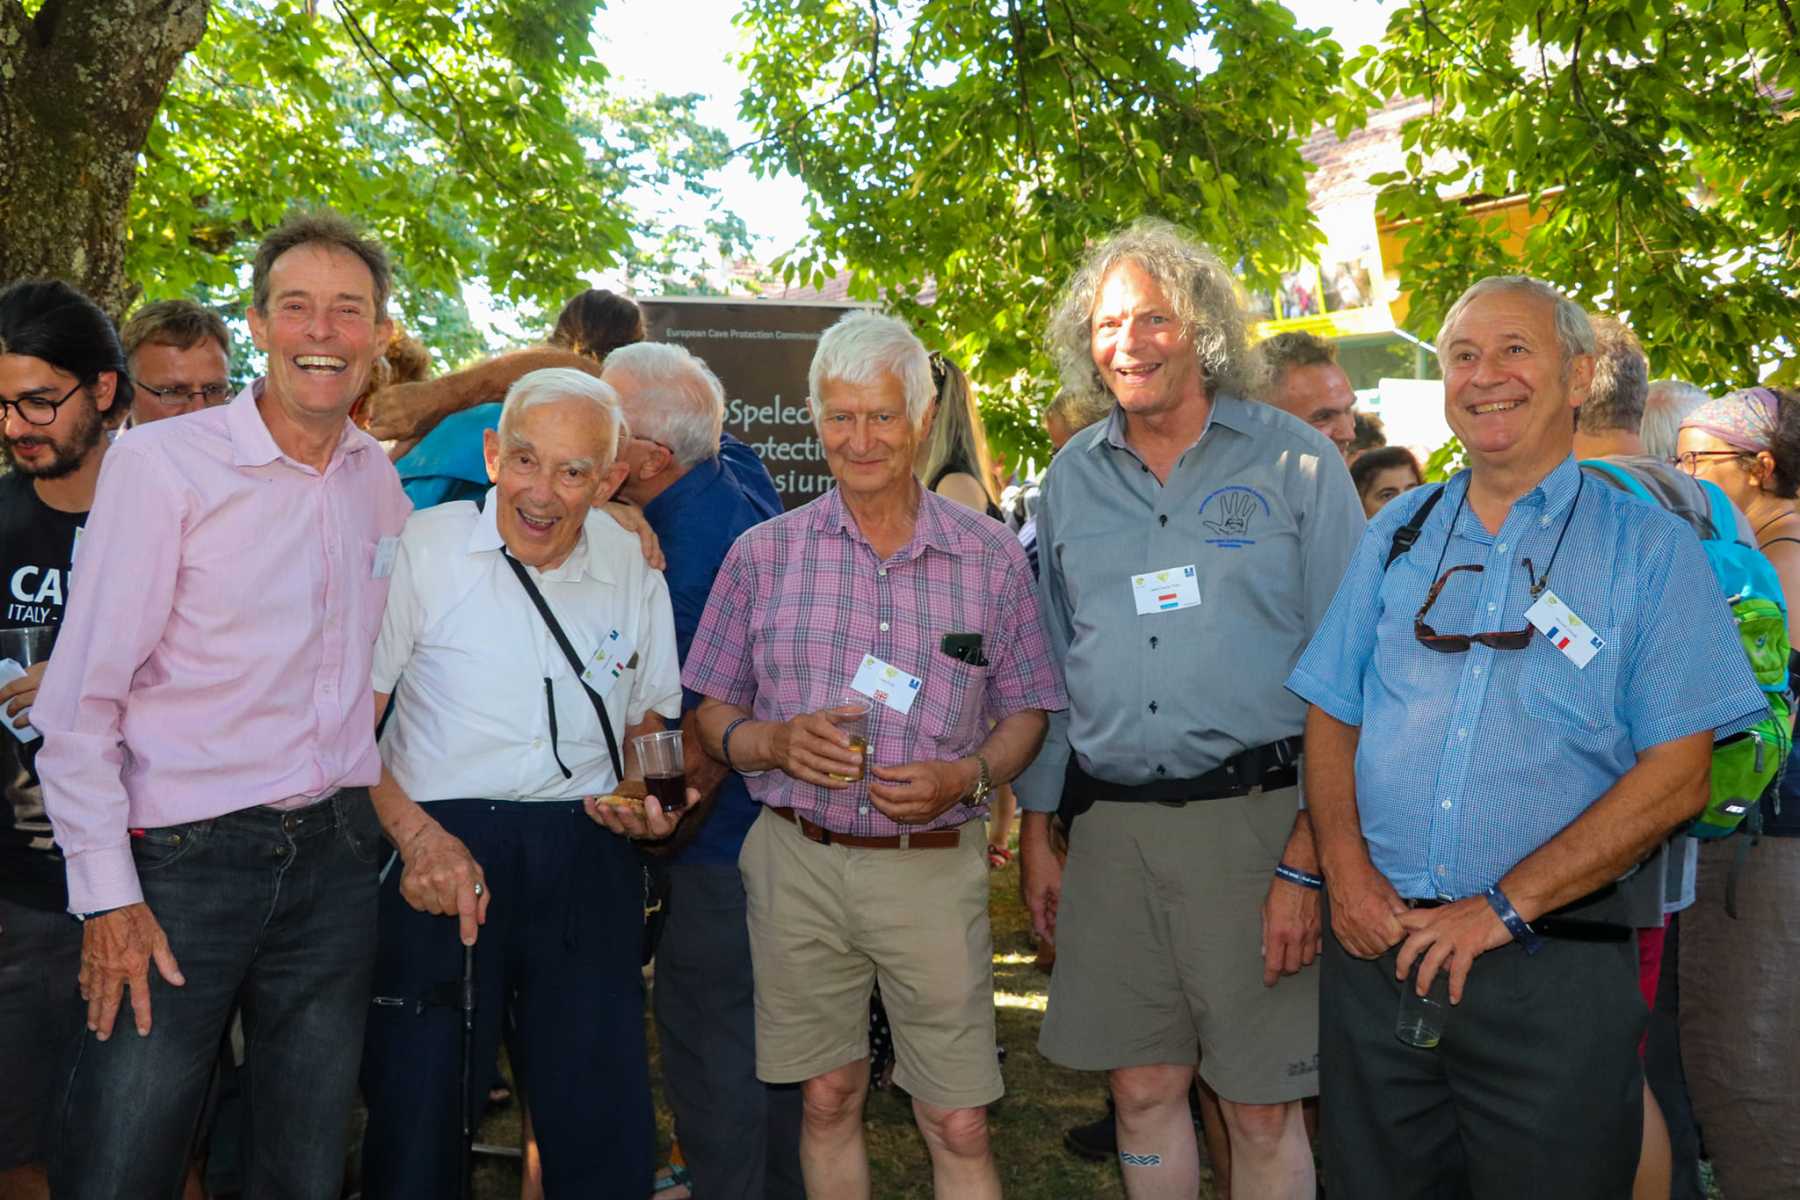 Gerard Campion with 4 of the founding members: Arrigo Cigna, Andy Eavis, Claude Mouret and Jean-Claude Thies. Photo by Ernest Geyer